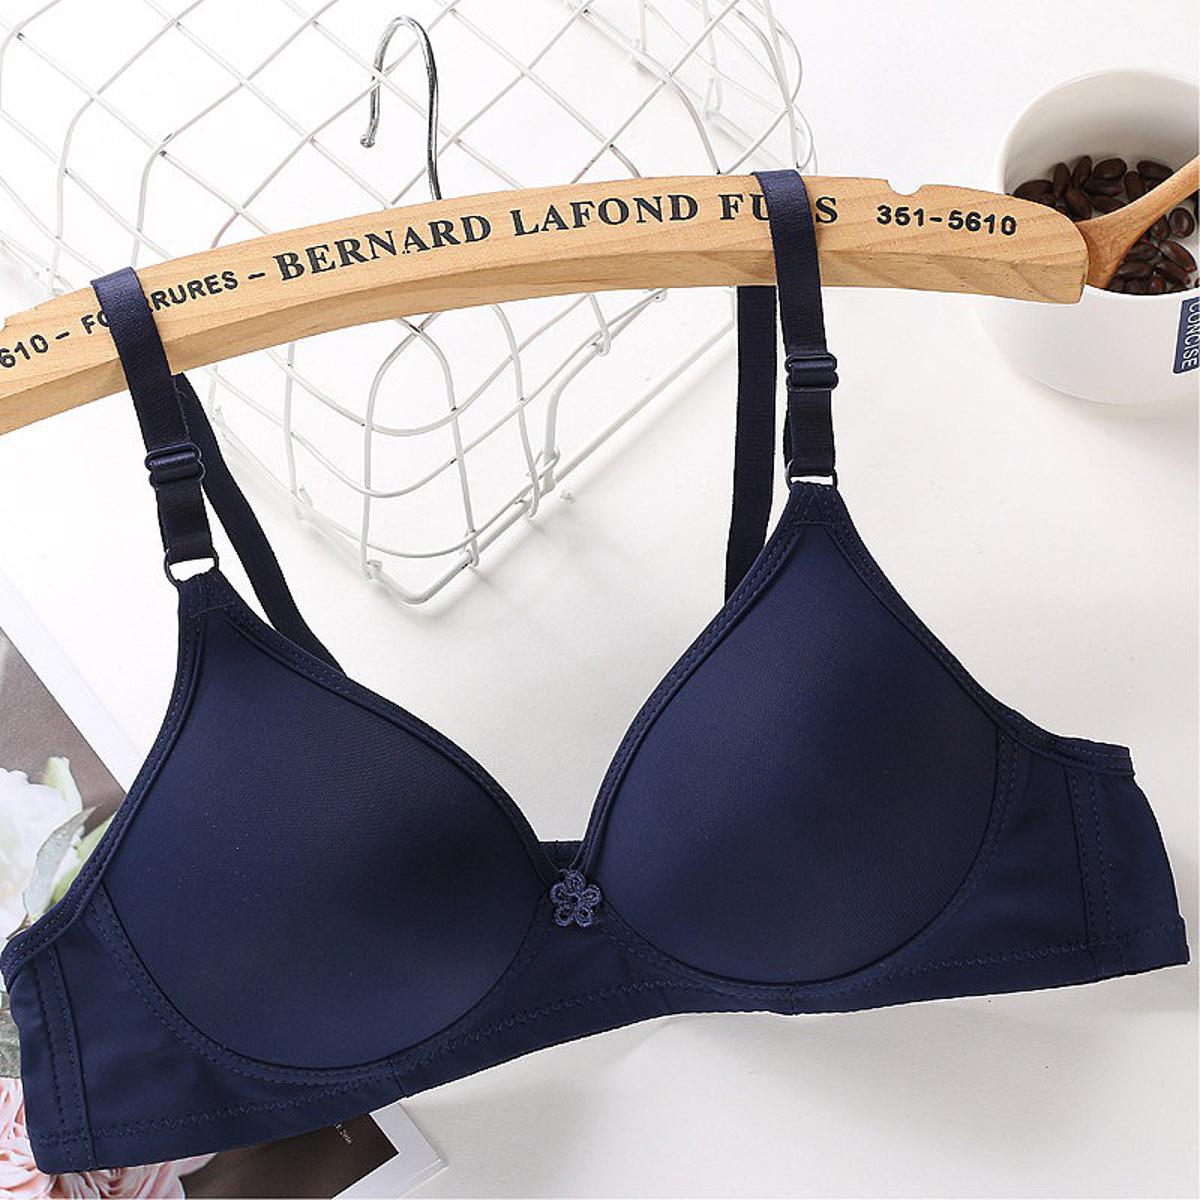 IFG Copy Bras Comfort For Women And Girls